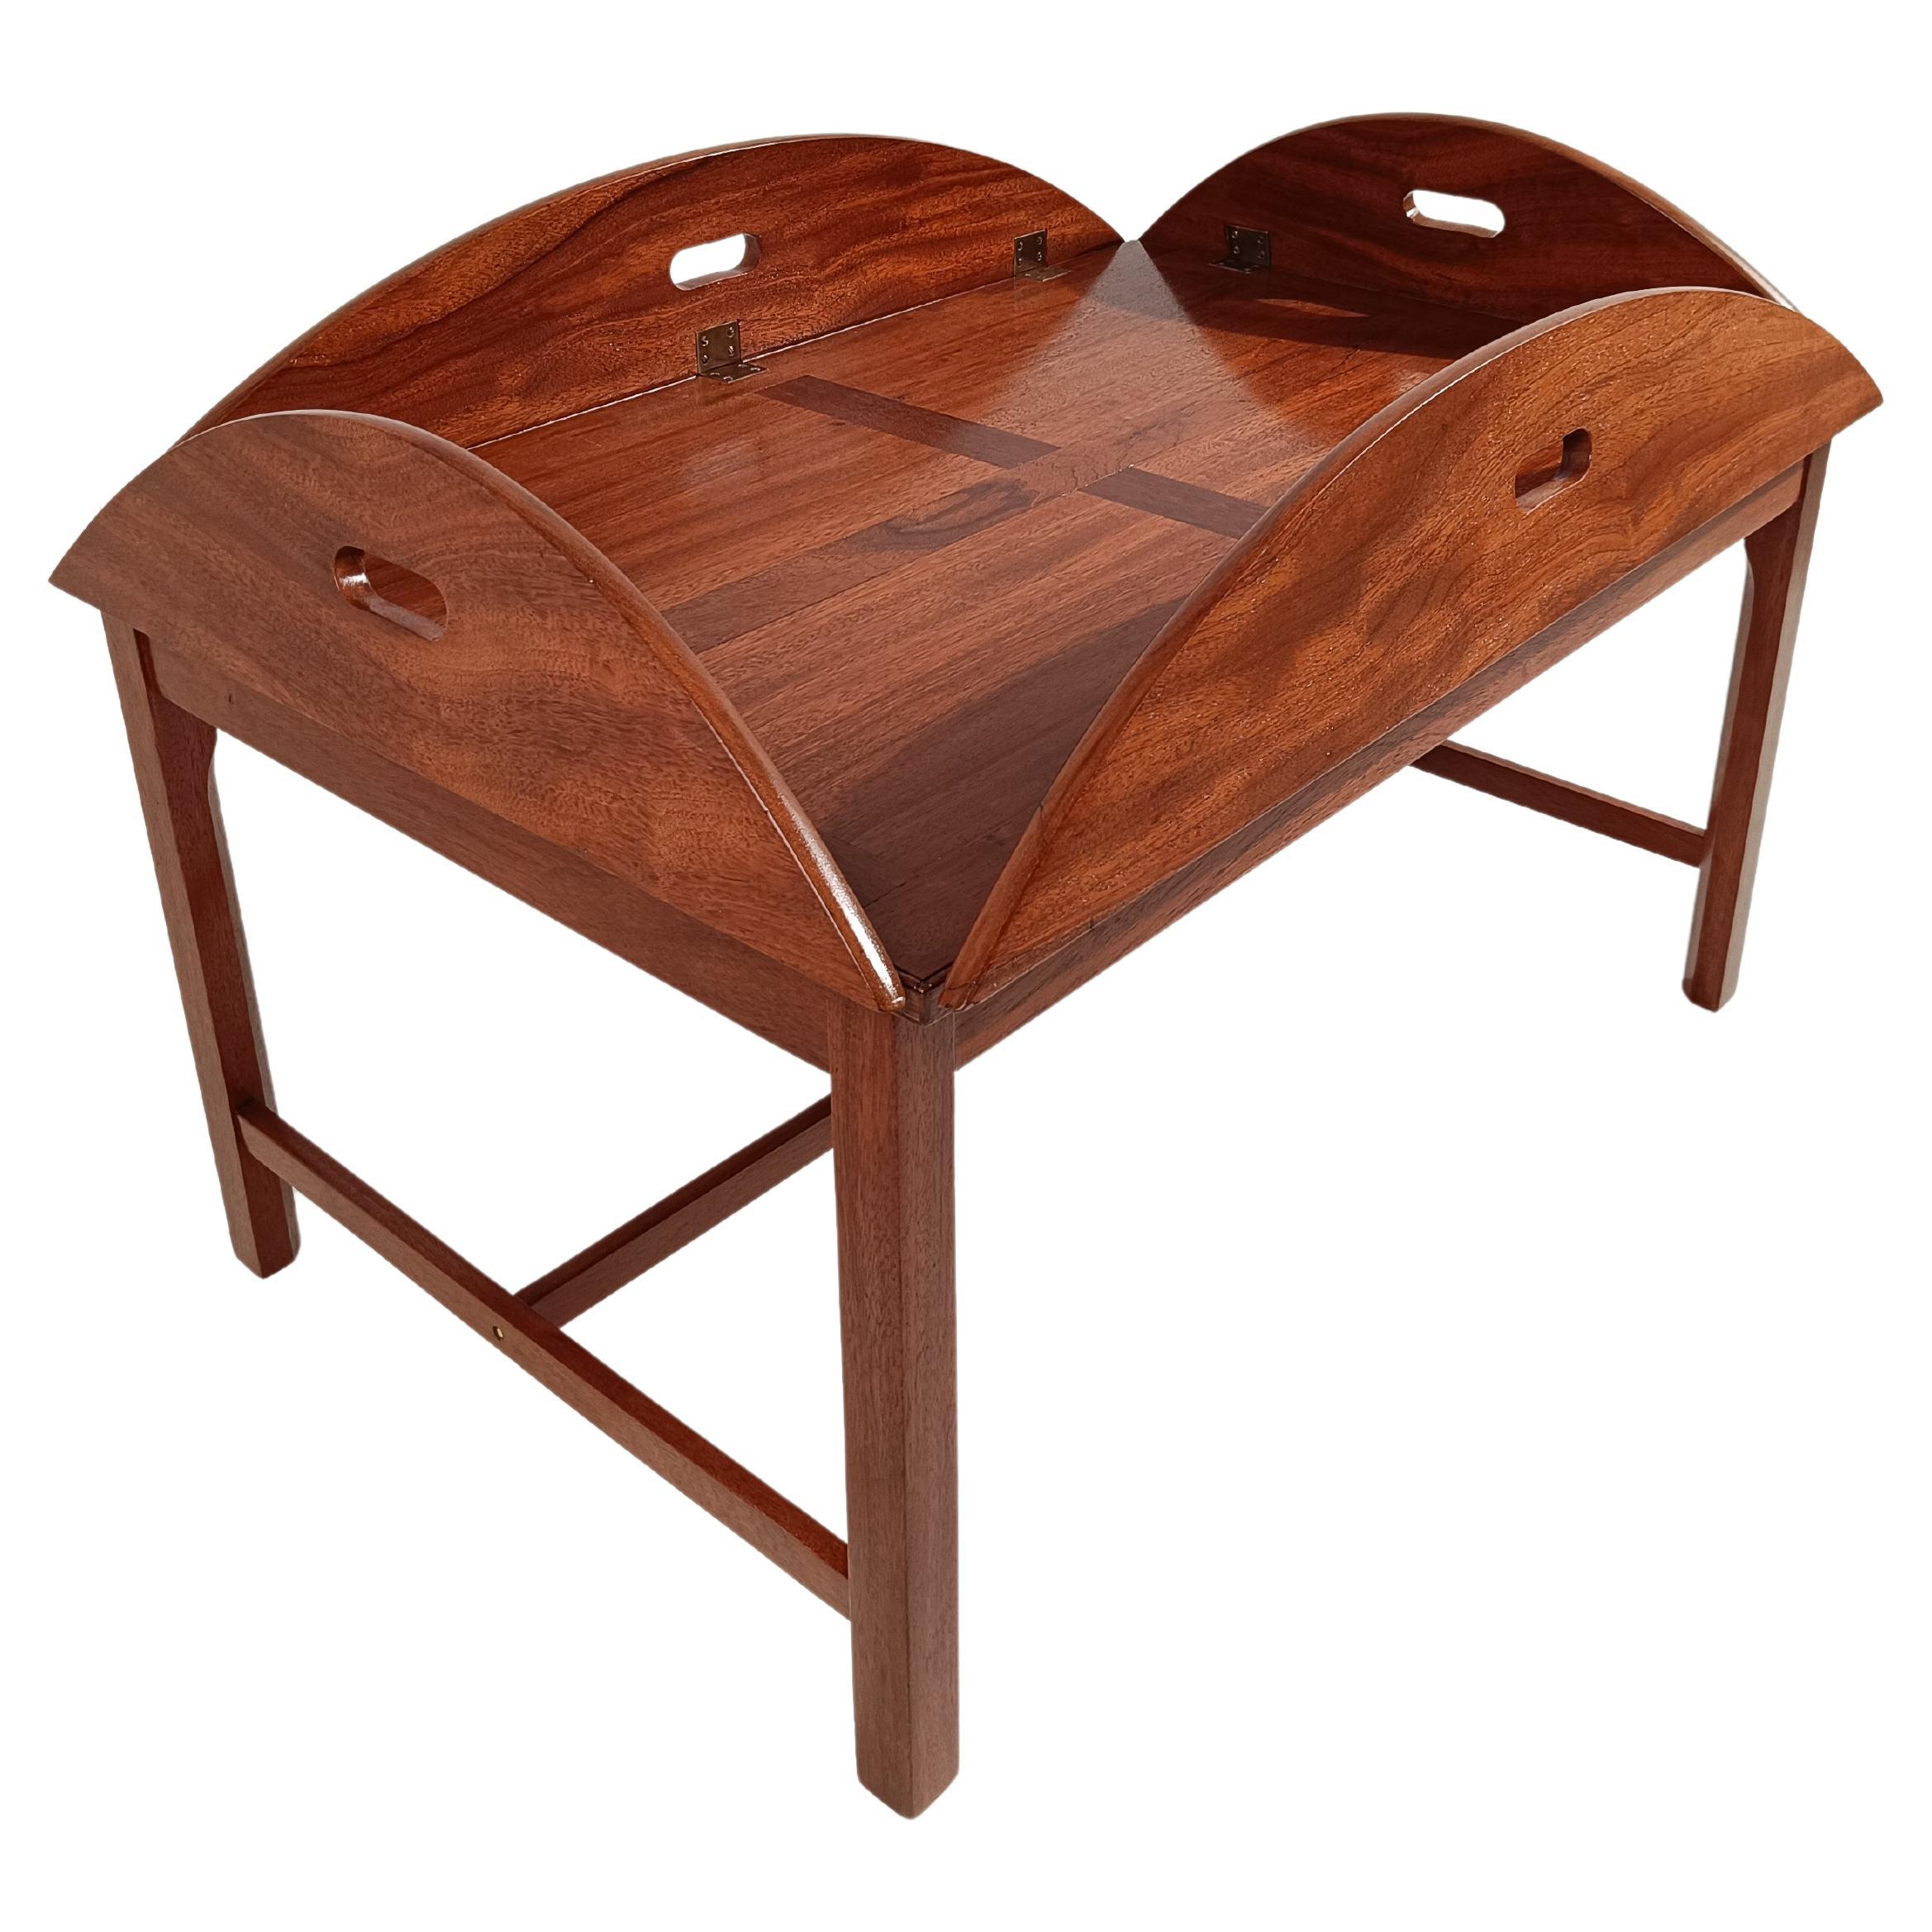 Vintage Oval Mahogany Butler's Coffee Tray Table in Georgian-style, Circa 1960s For Sale